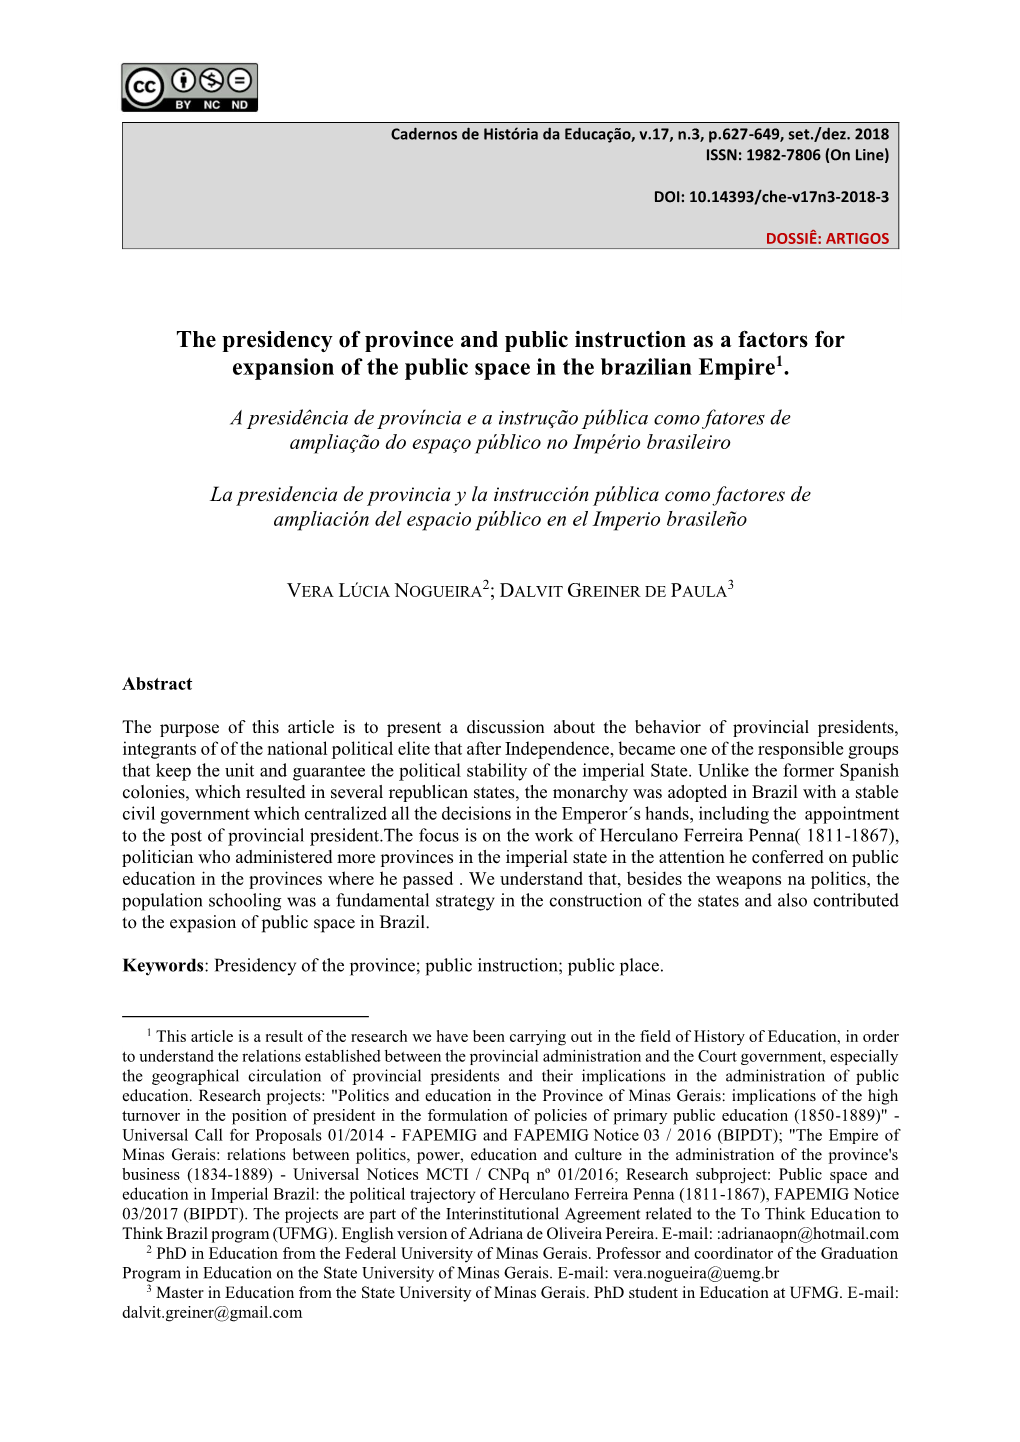 The Presidency of Province and Public Instruction As a Factors for Expansion of the Public Space in the Brazilian Empire1